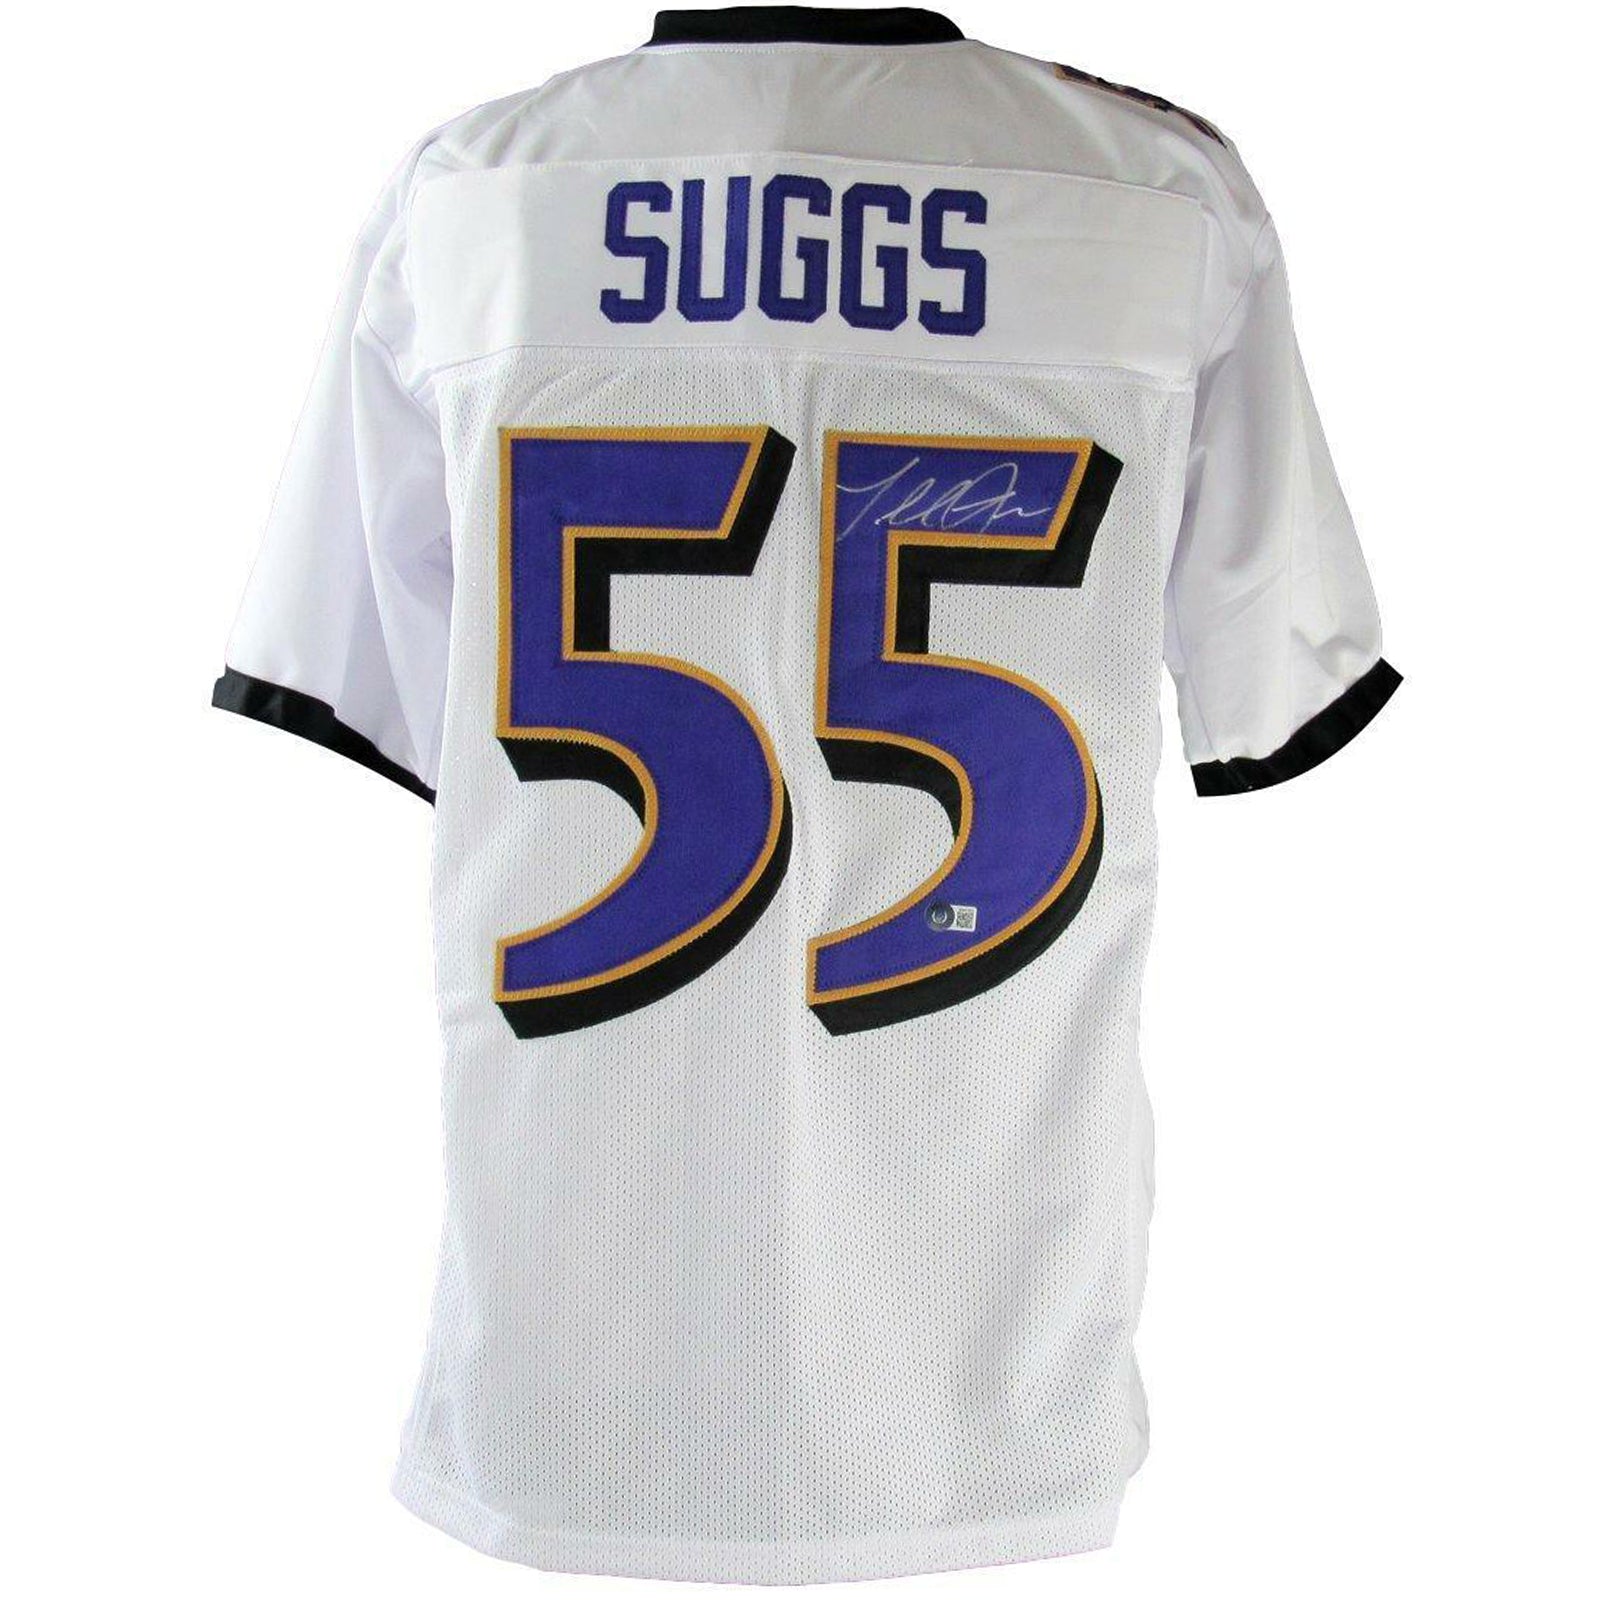 Terrell Suggs Autographed Baltimore (White #55) Custom Jersey - JSA